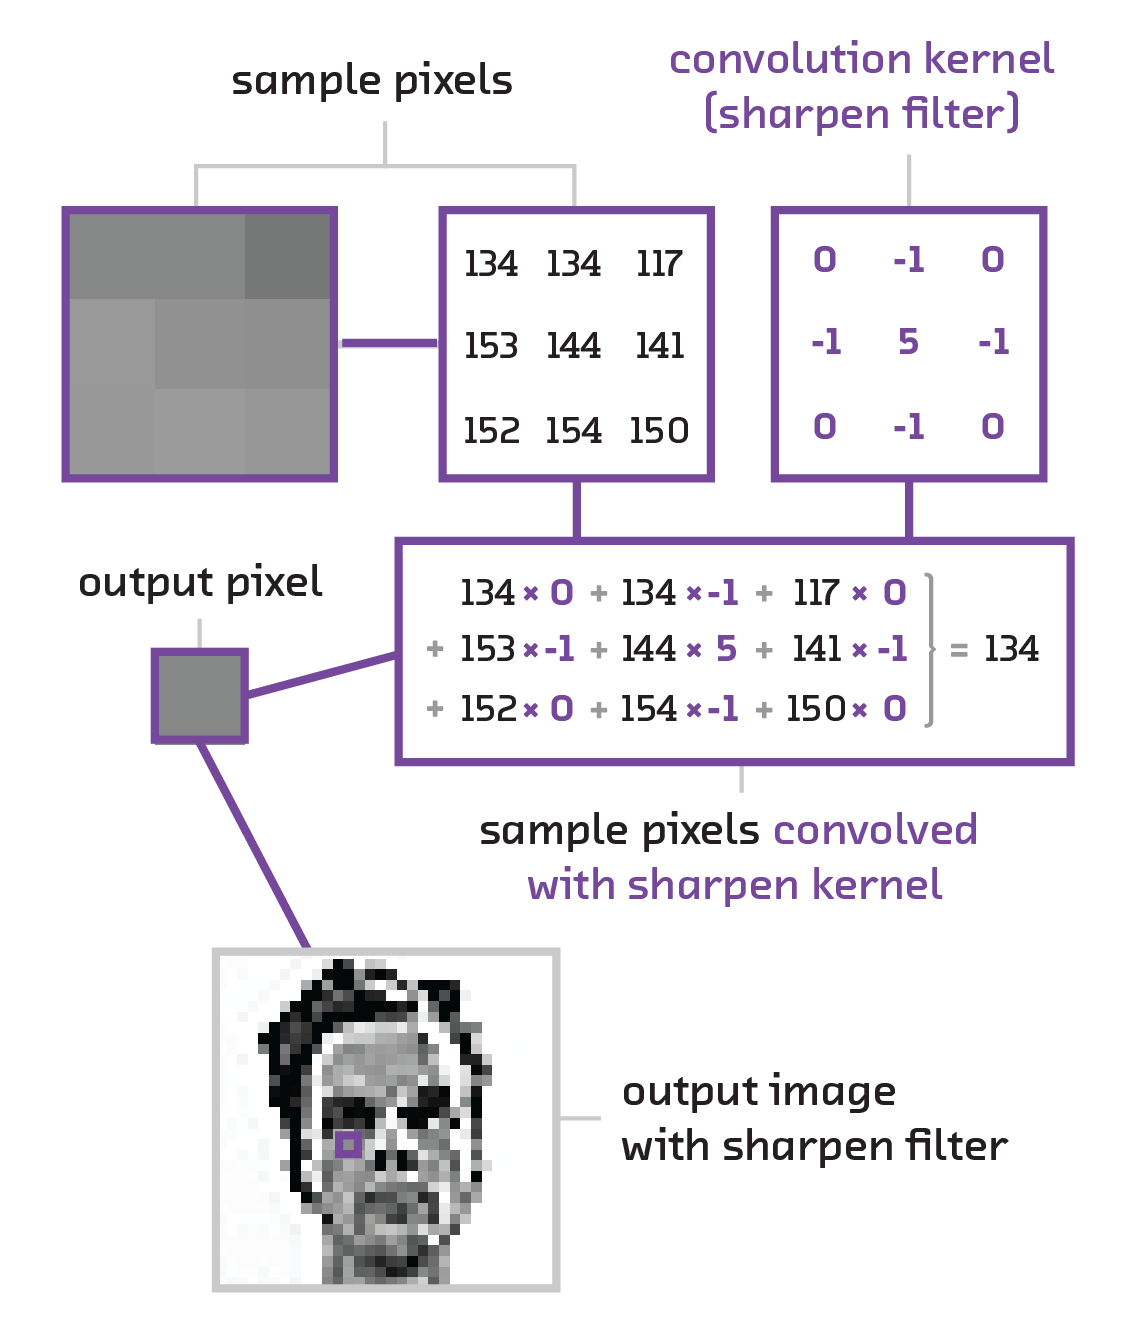 Convolutional neural networks learn to create kernels that encode the spatial features of a 2D image into a 1D feature vector. This example shows a premade kernel for a sharpen filter.